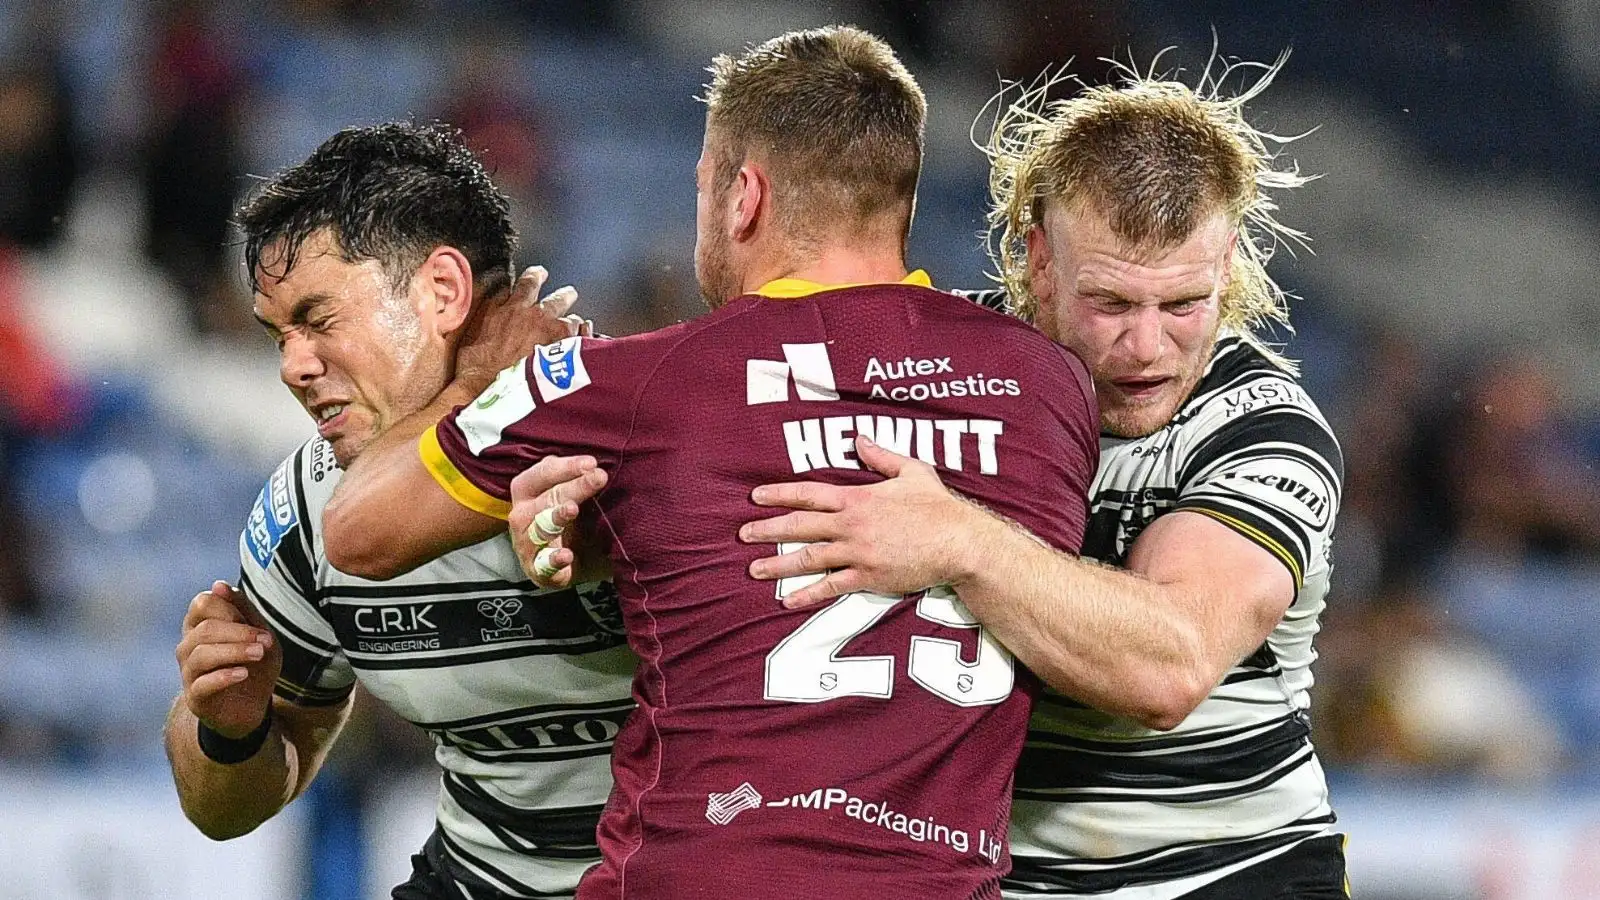 Exclusive: New Super League club expresses interest in Hull FC forward Andre Savelio